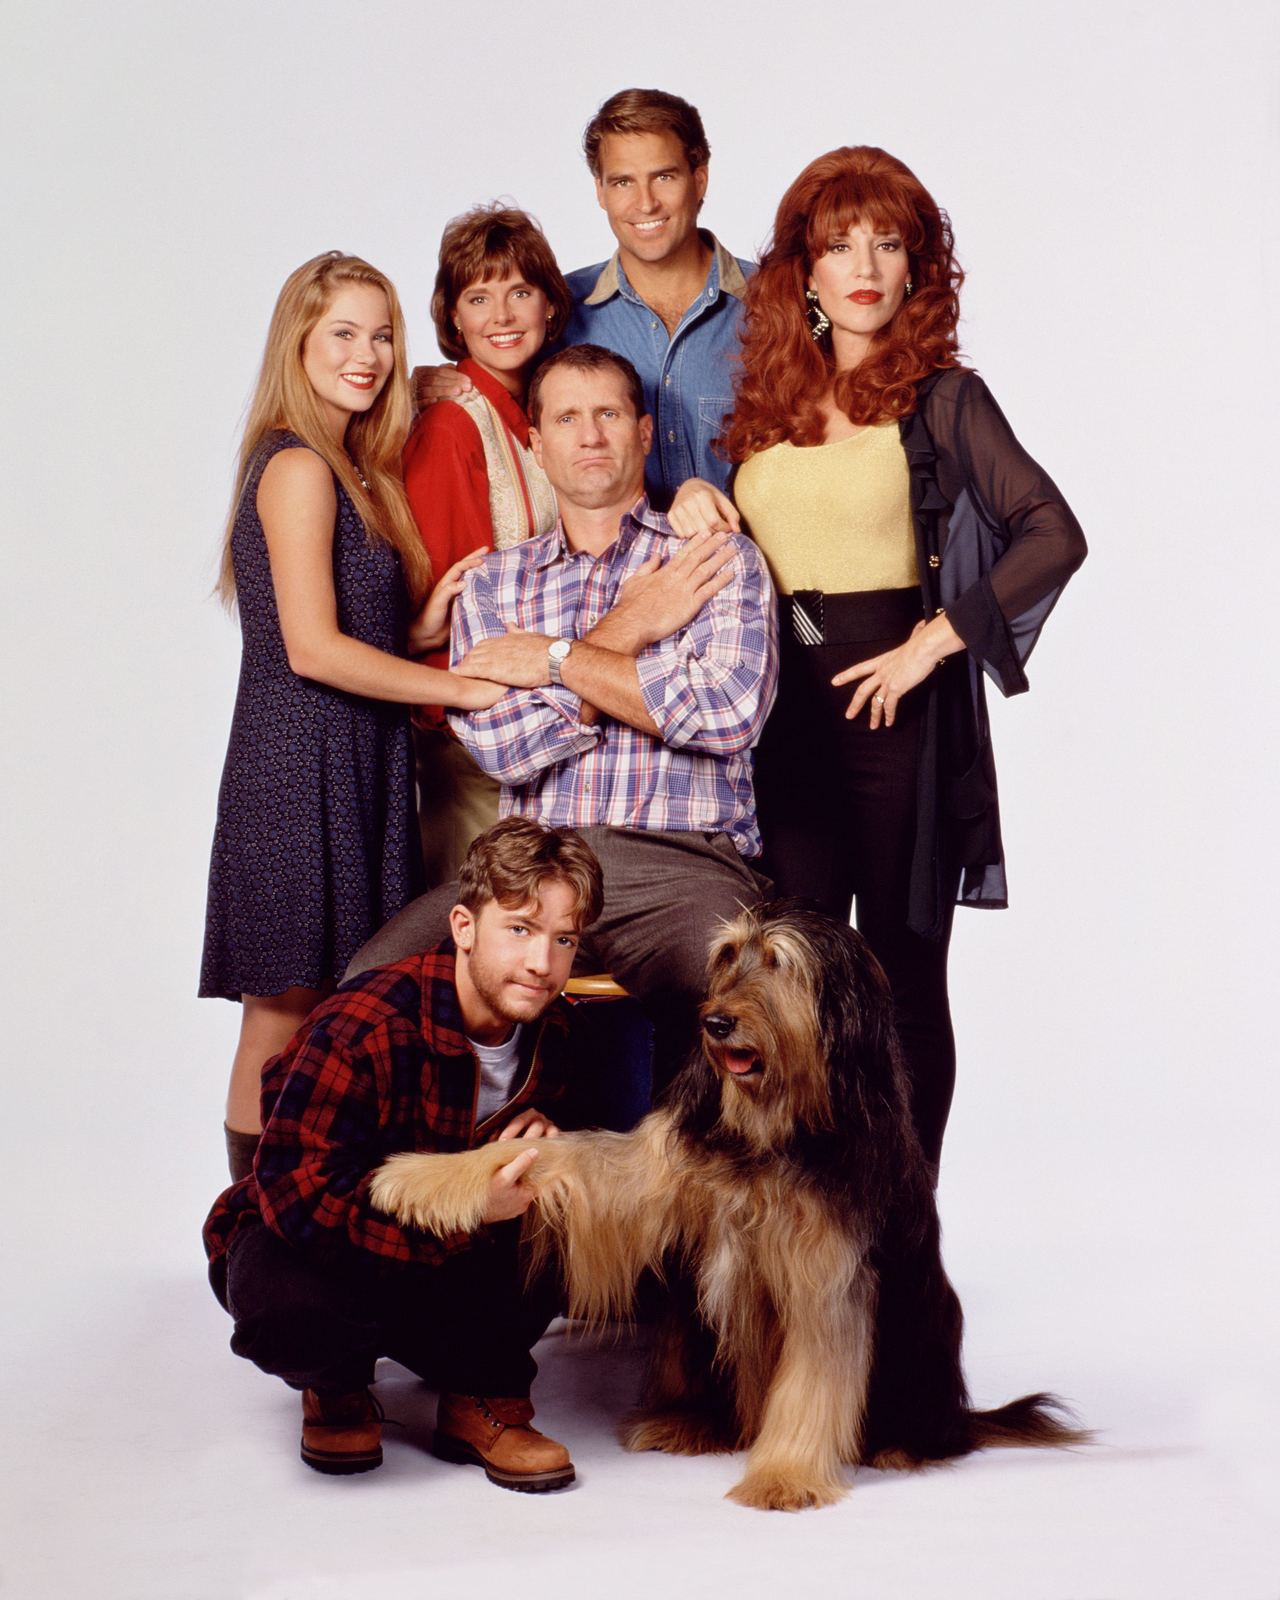 Christina Applegate, Amanda Bearse, Ted McGinley, Katey Sagal, Ed O'Neill and David Faustino in a still from FOX's 